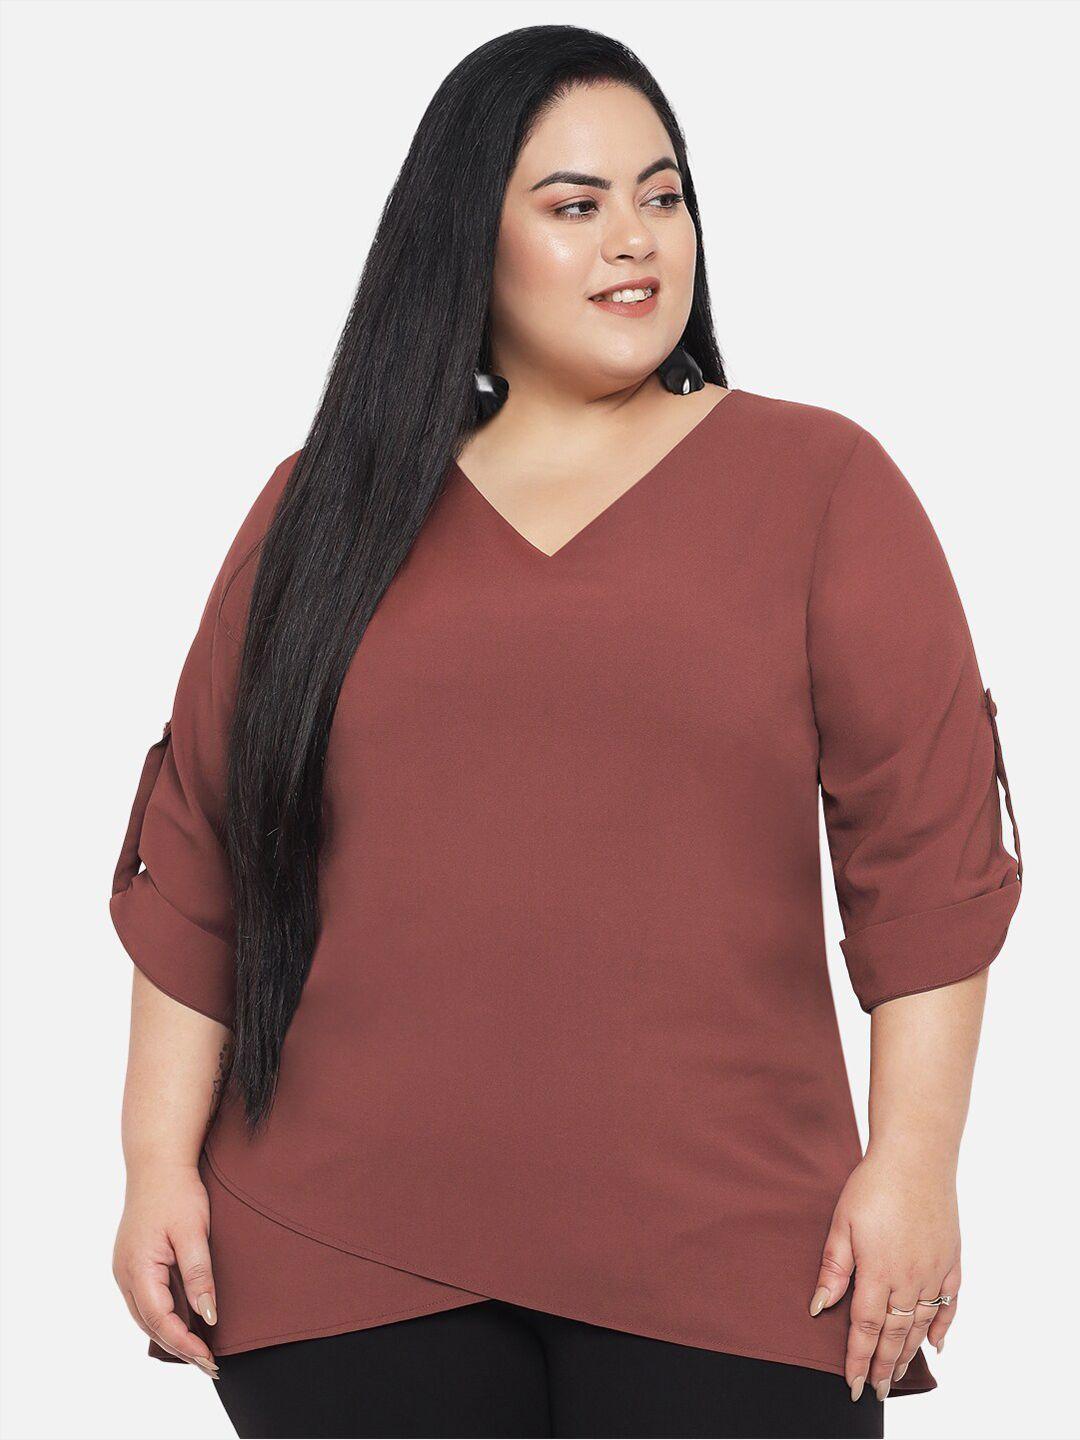 wild-u-plus-size-women-pink-roll-up-sleeves-layered-georgette-top